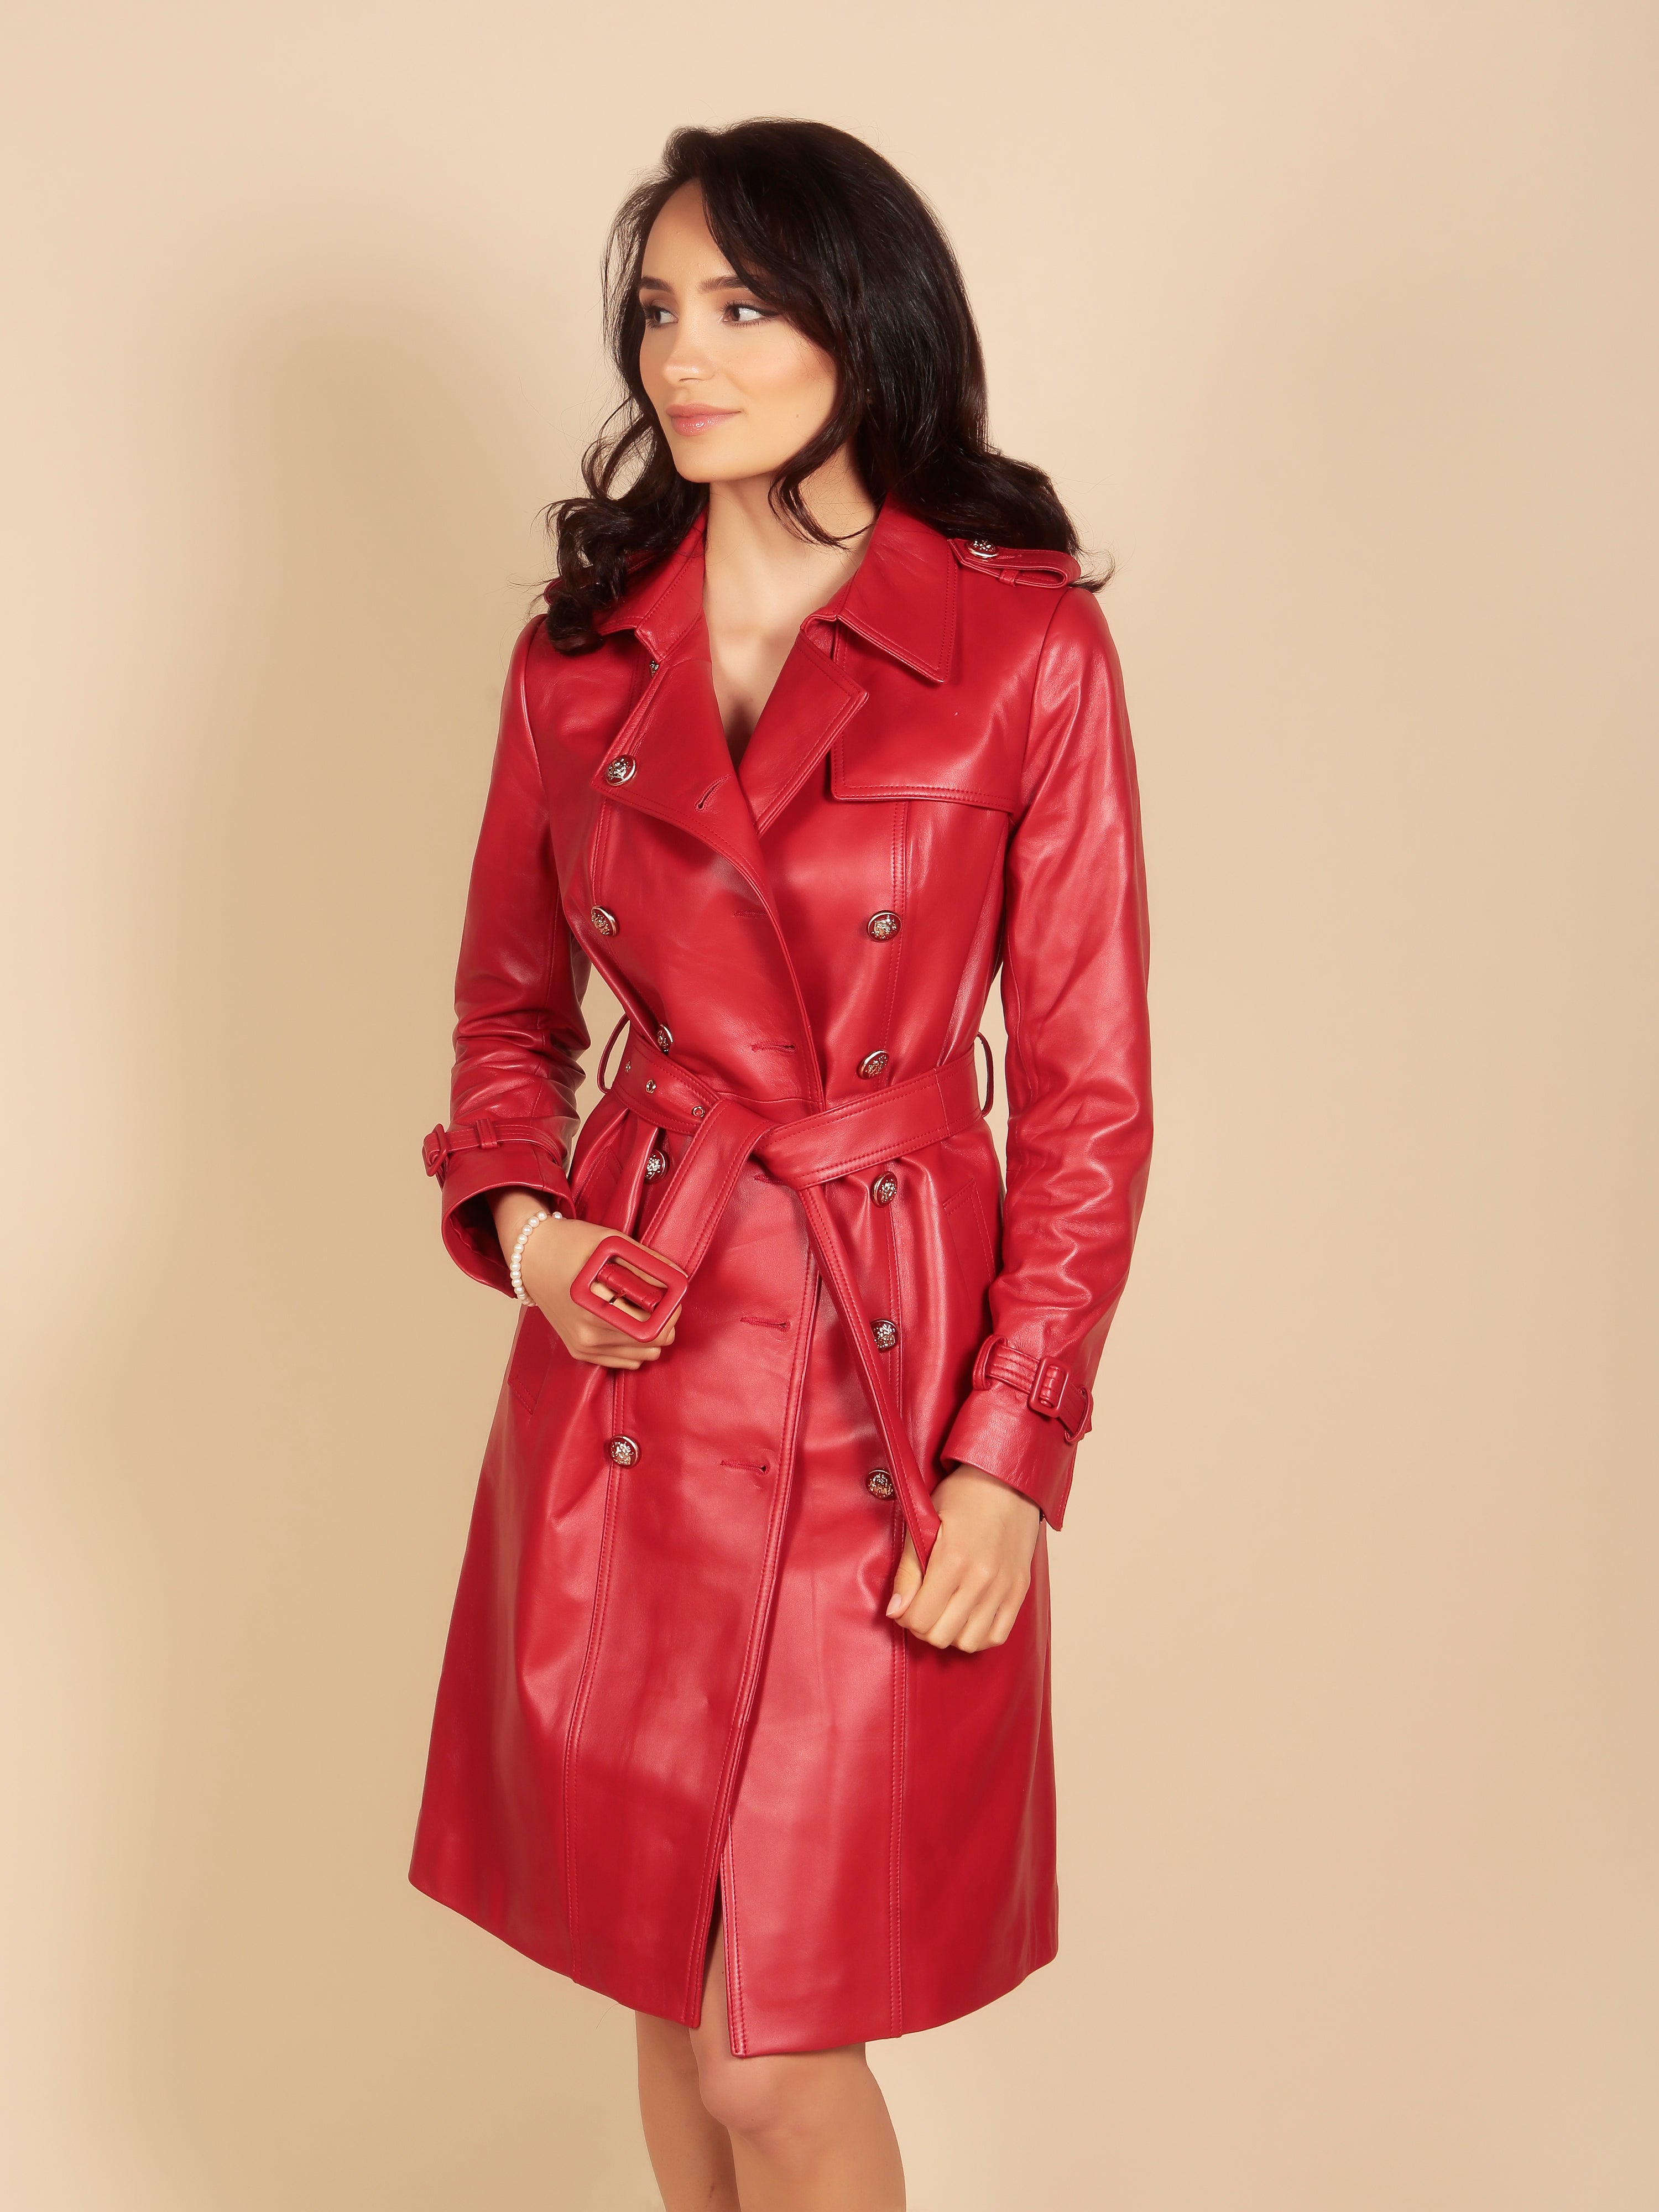 'Belle Du Jour' Leather Trench Coat in Rosso – Santinni